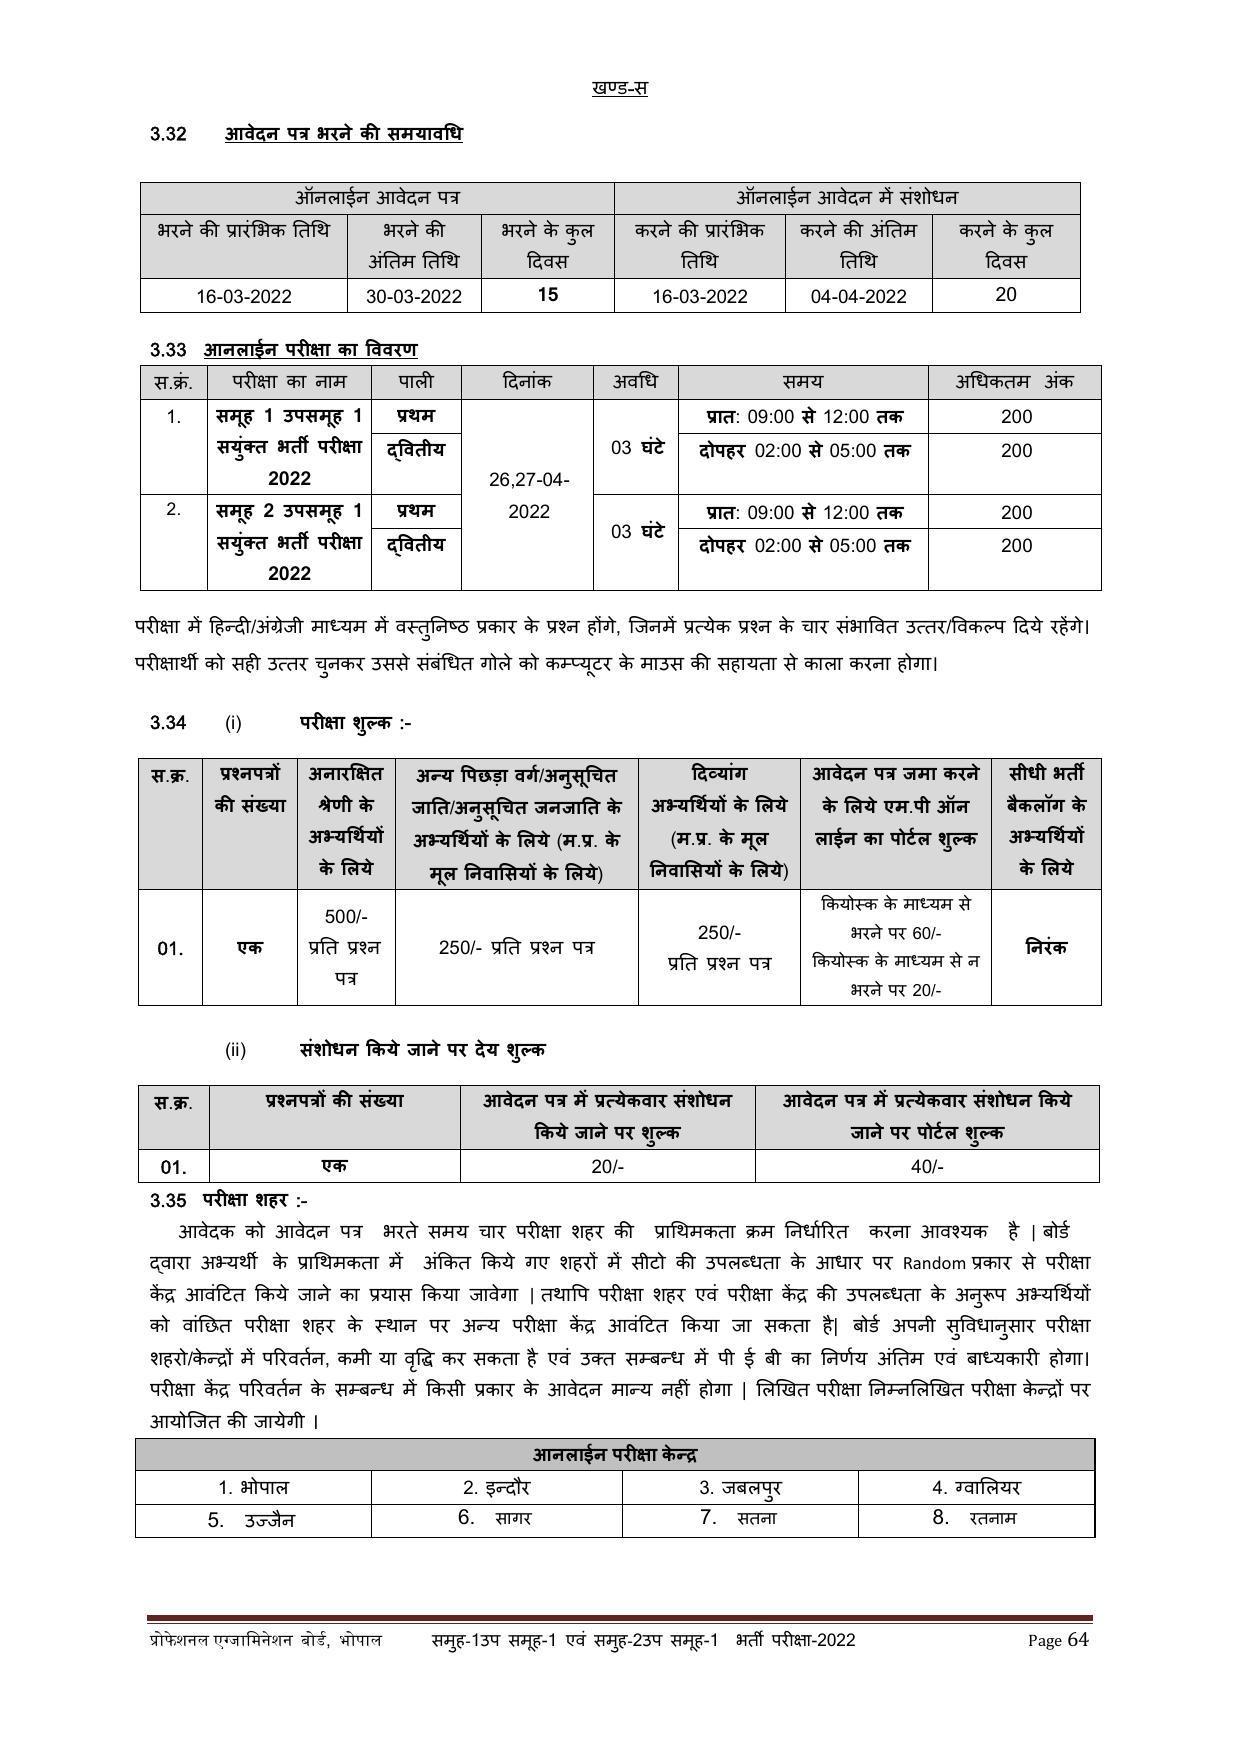 MPPEB Group-I Sub Group-I & Group-II Sub Group-I Recruitment 2022 - Page 25